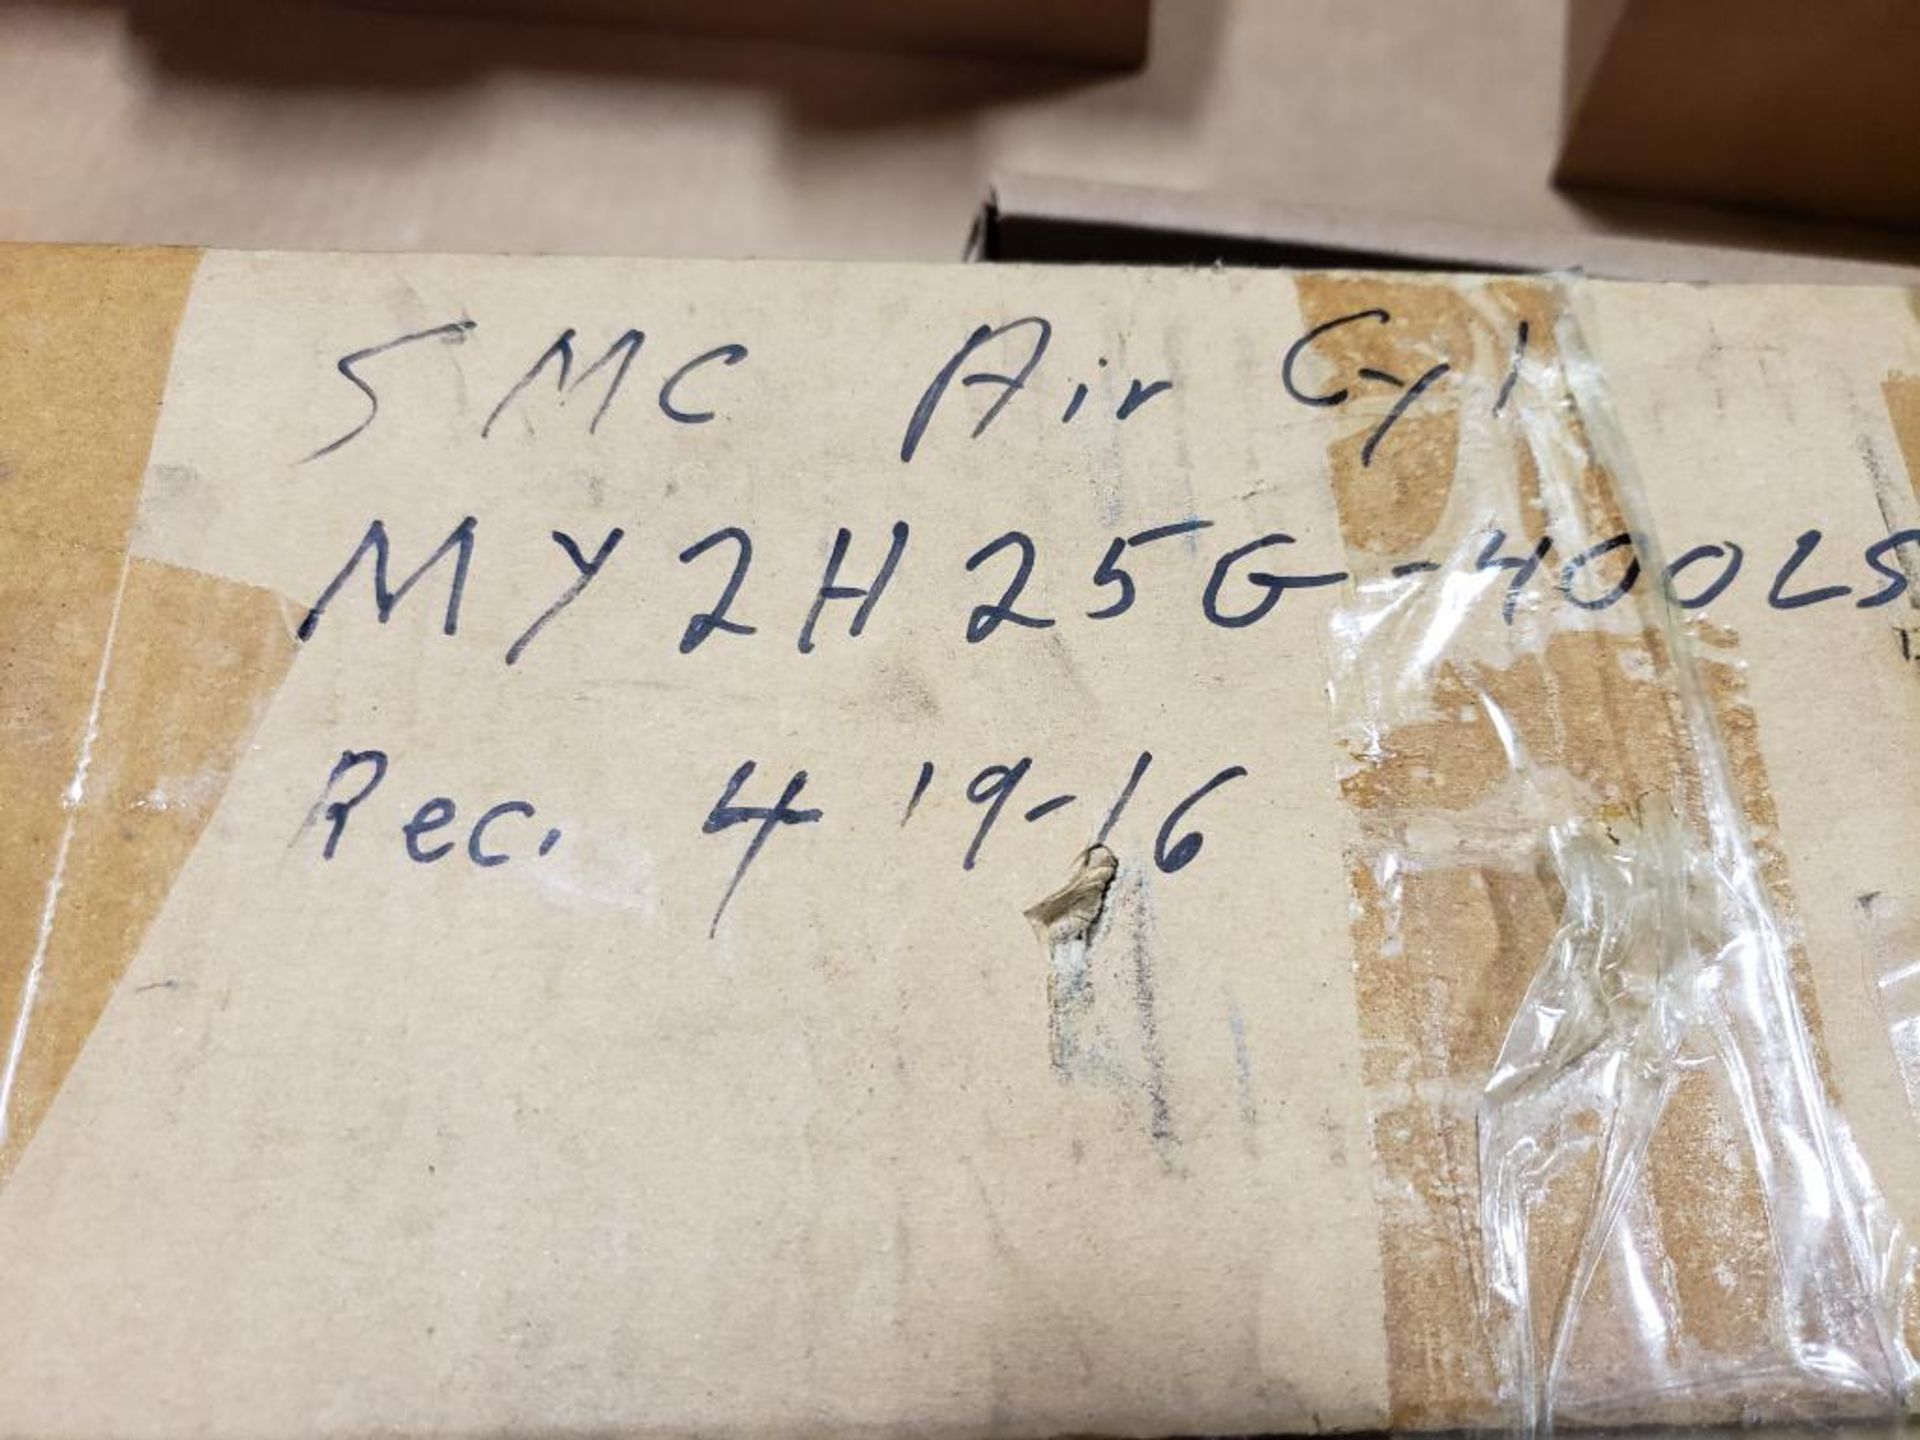 SMC pneumatic cylinder. MY2H25G-400LS. New in box. - Image 3 of 3